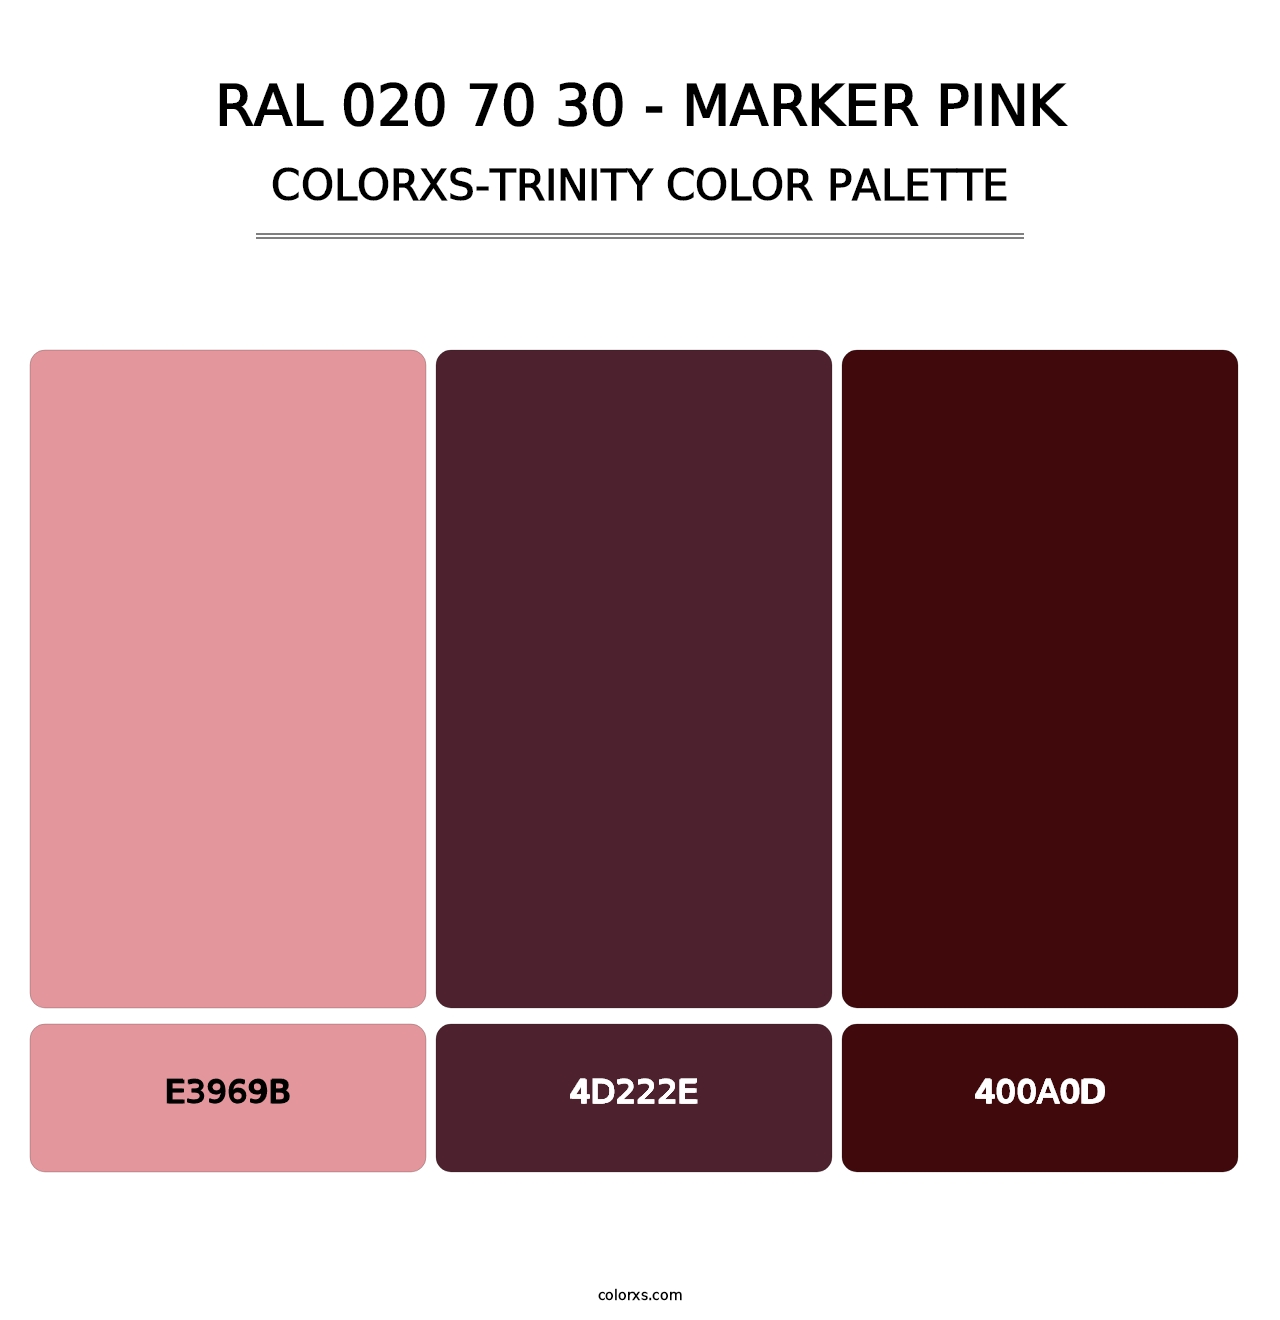 RAL 020 70 30 - Marker Pink - Colorxs Trinity Palette